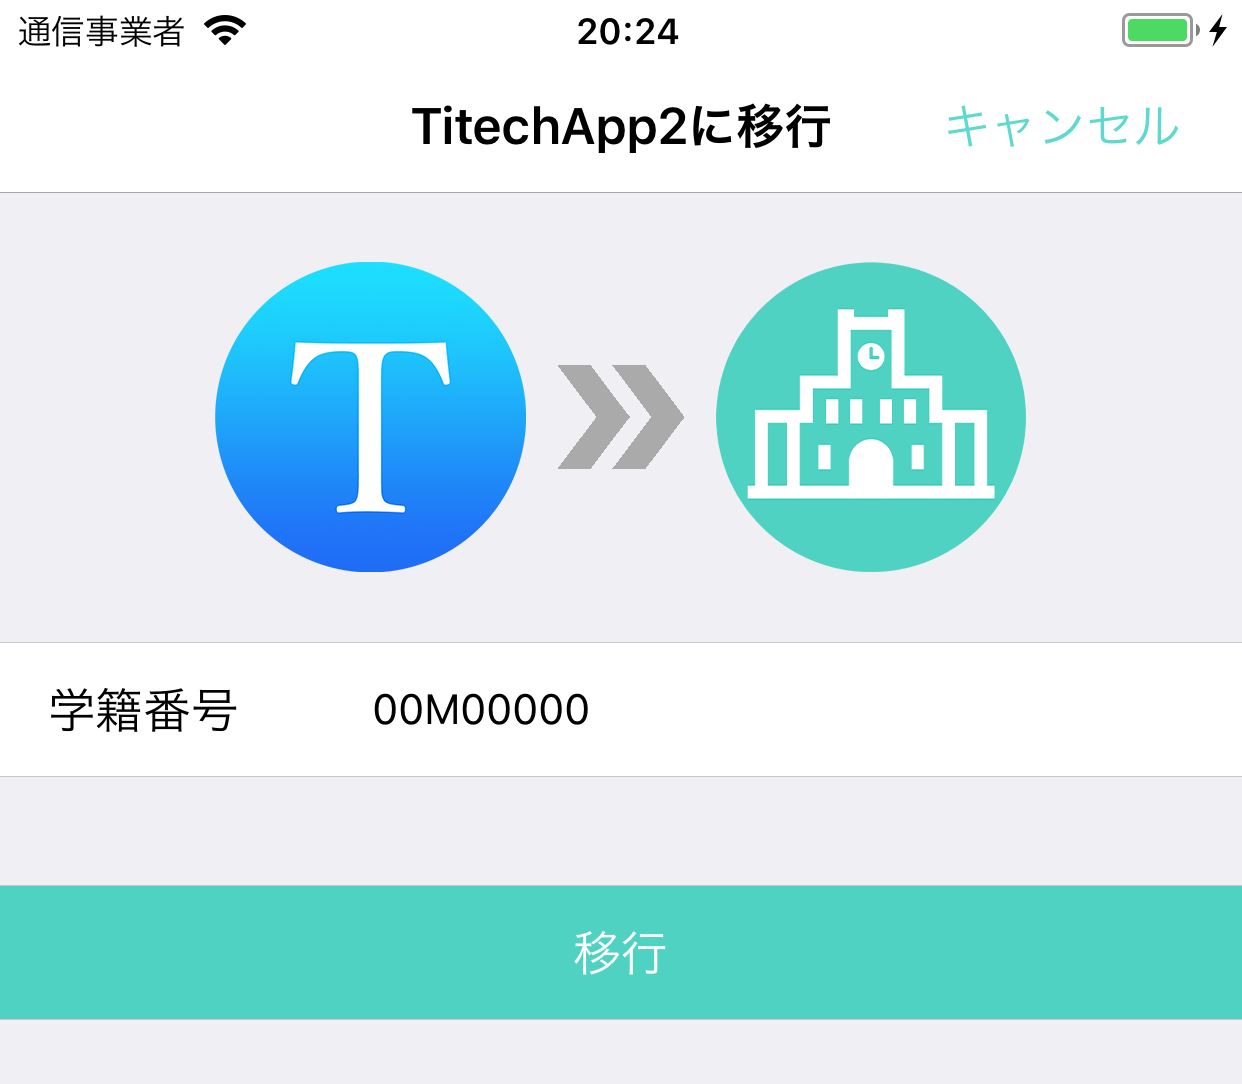 Migrate in One Tap